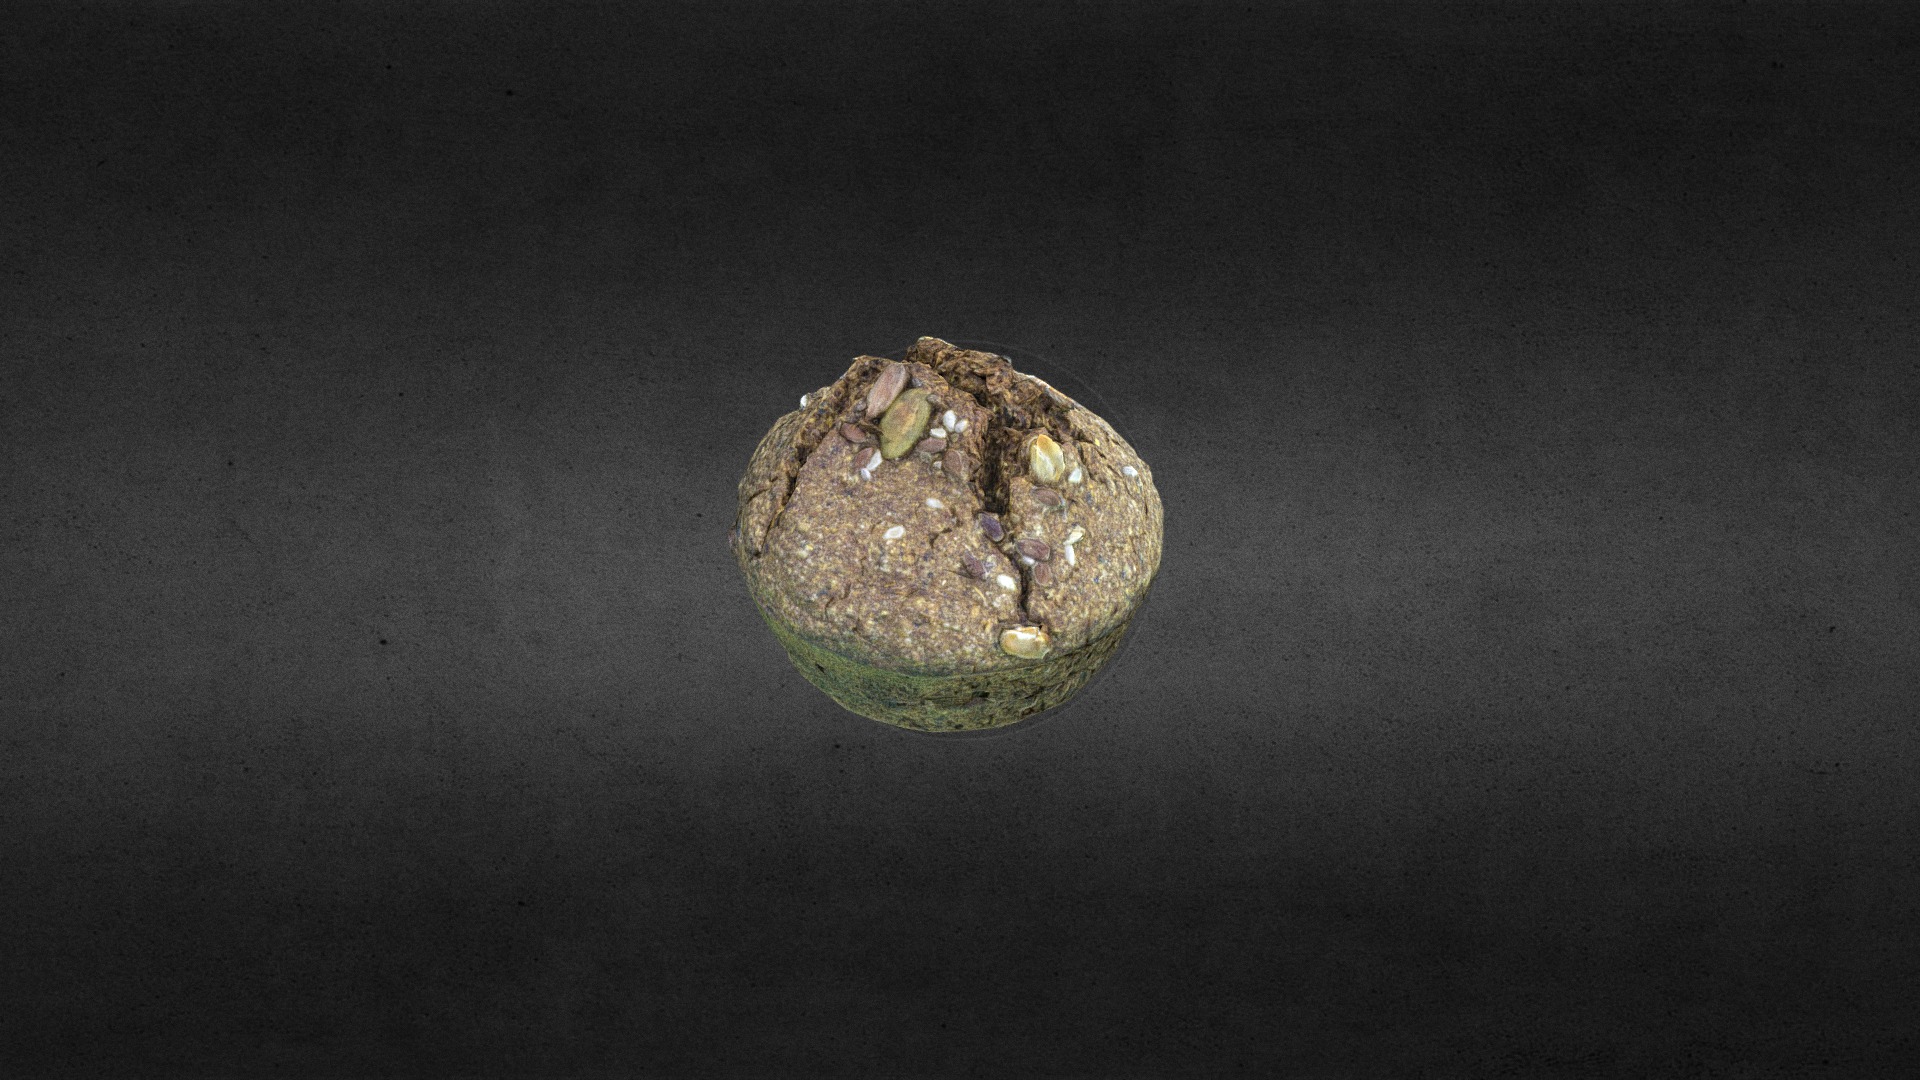 3D model Little bread low poly - This is a 3D model of the Little bread low poly. The 3D model is about a rock with a hole in it.